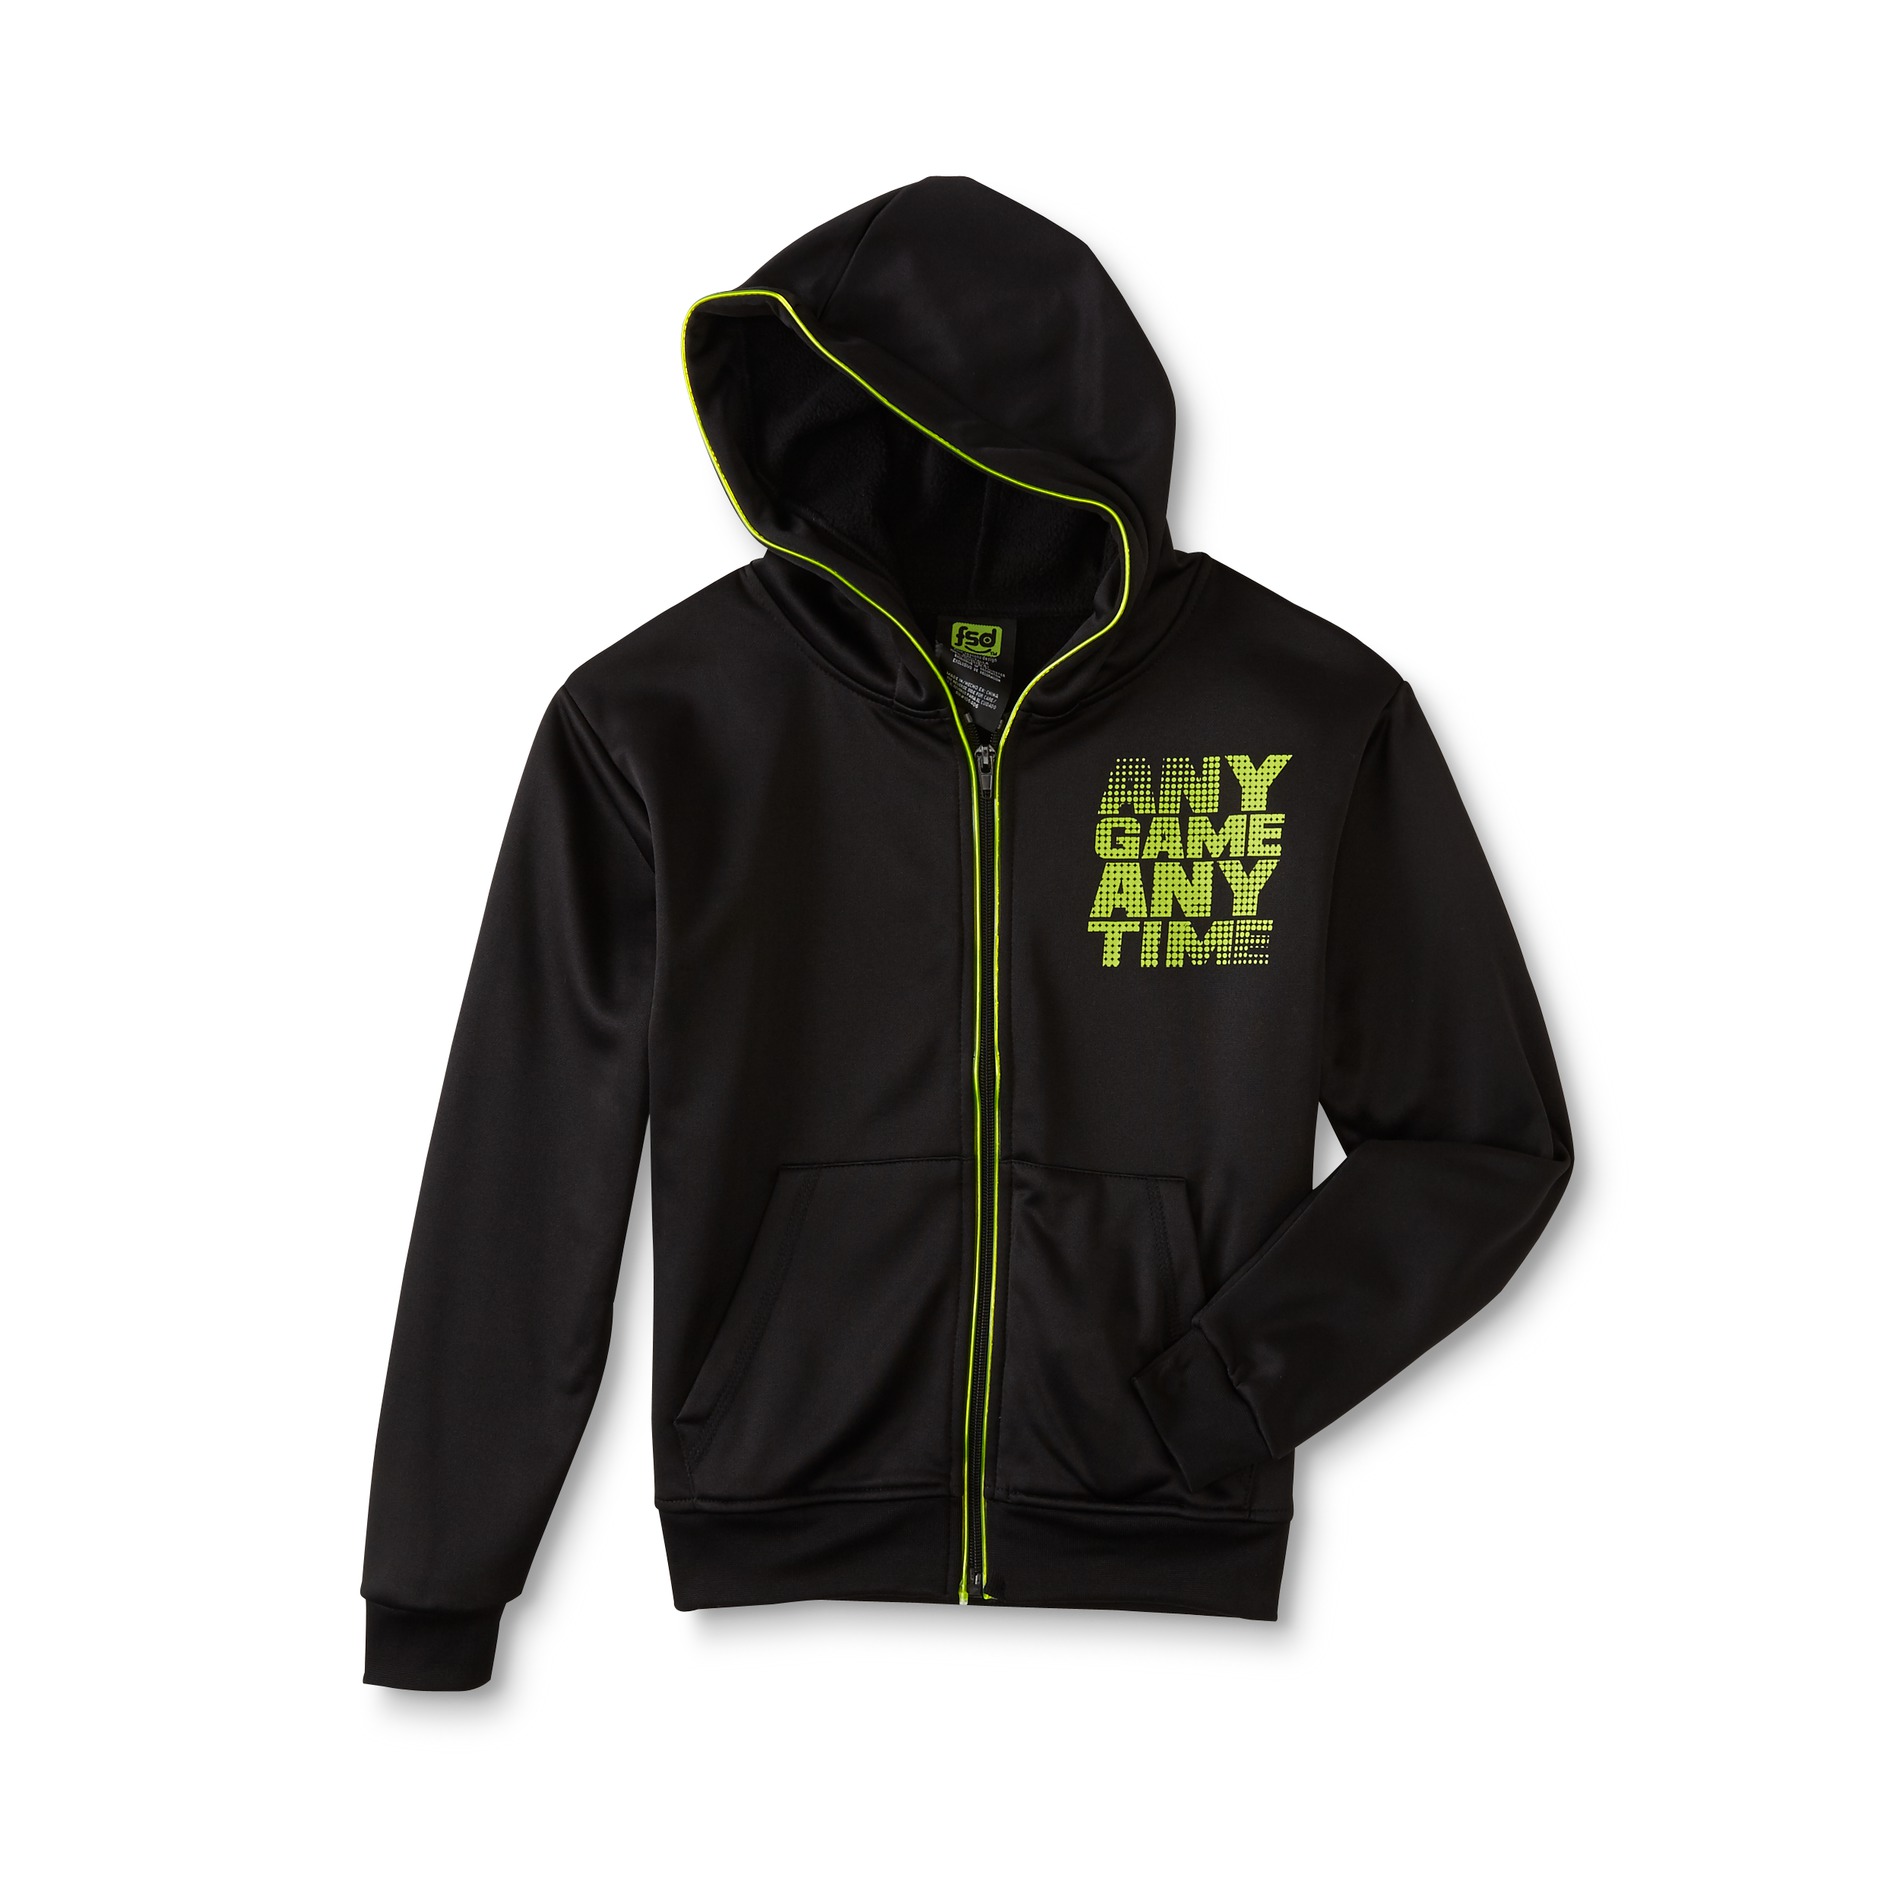 5Star Boys' Light-Up Hoodie Jacket - Any Game